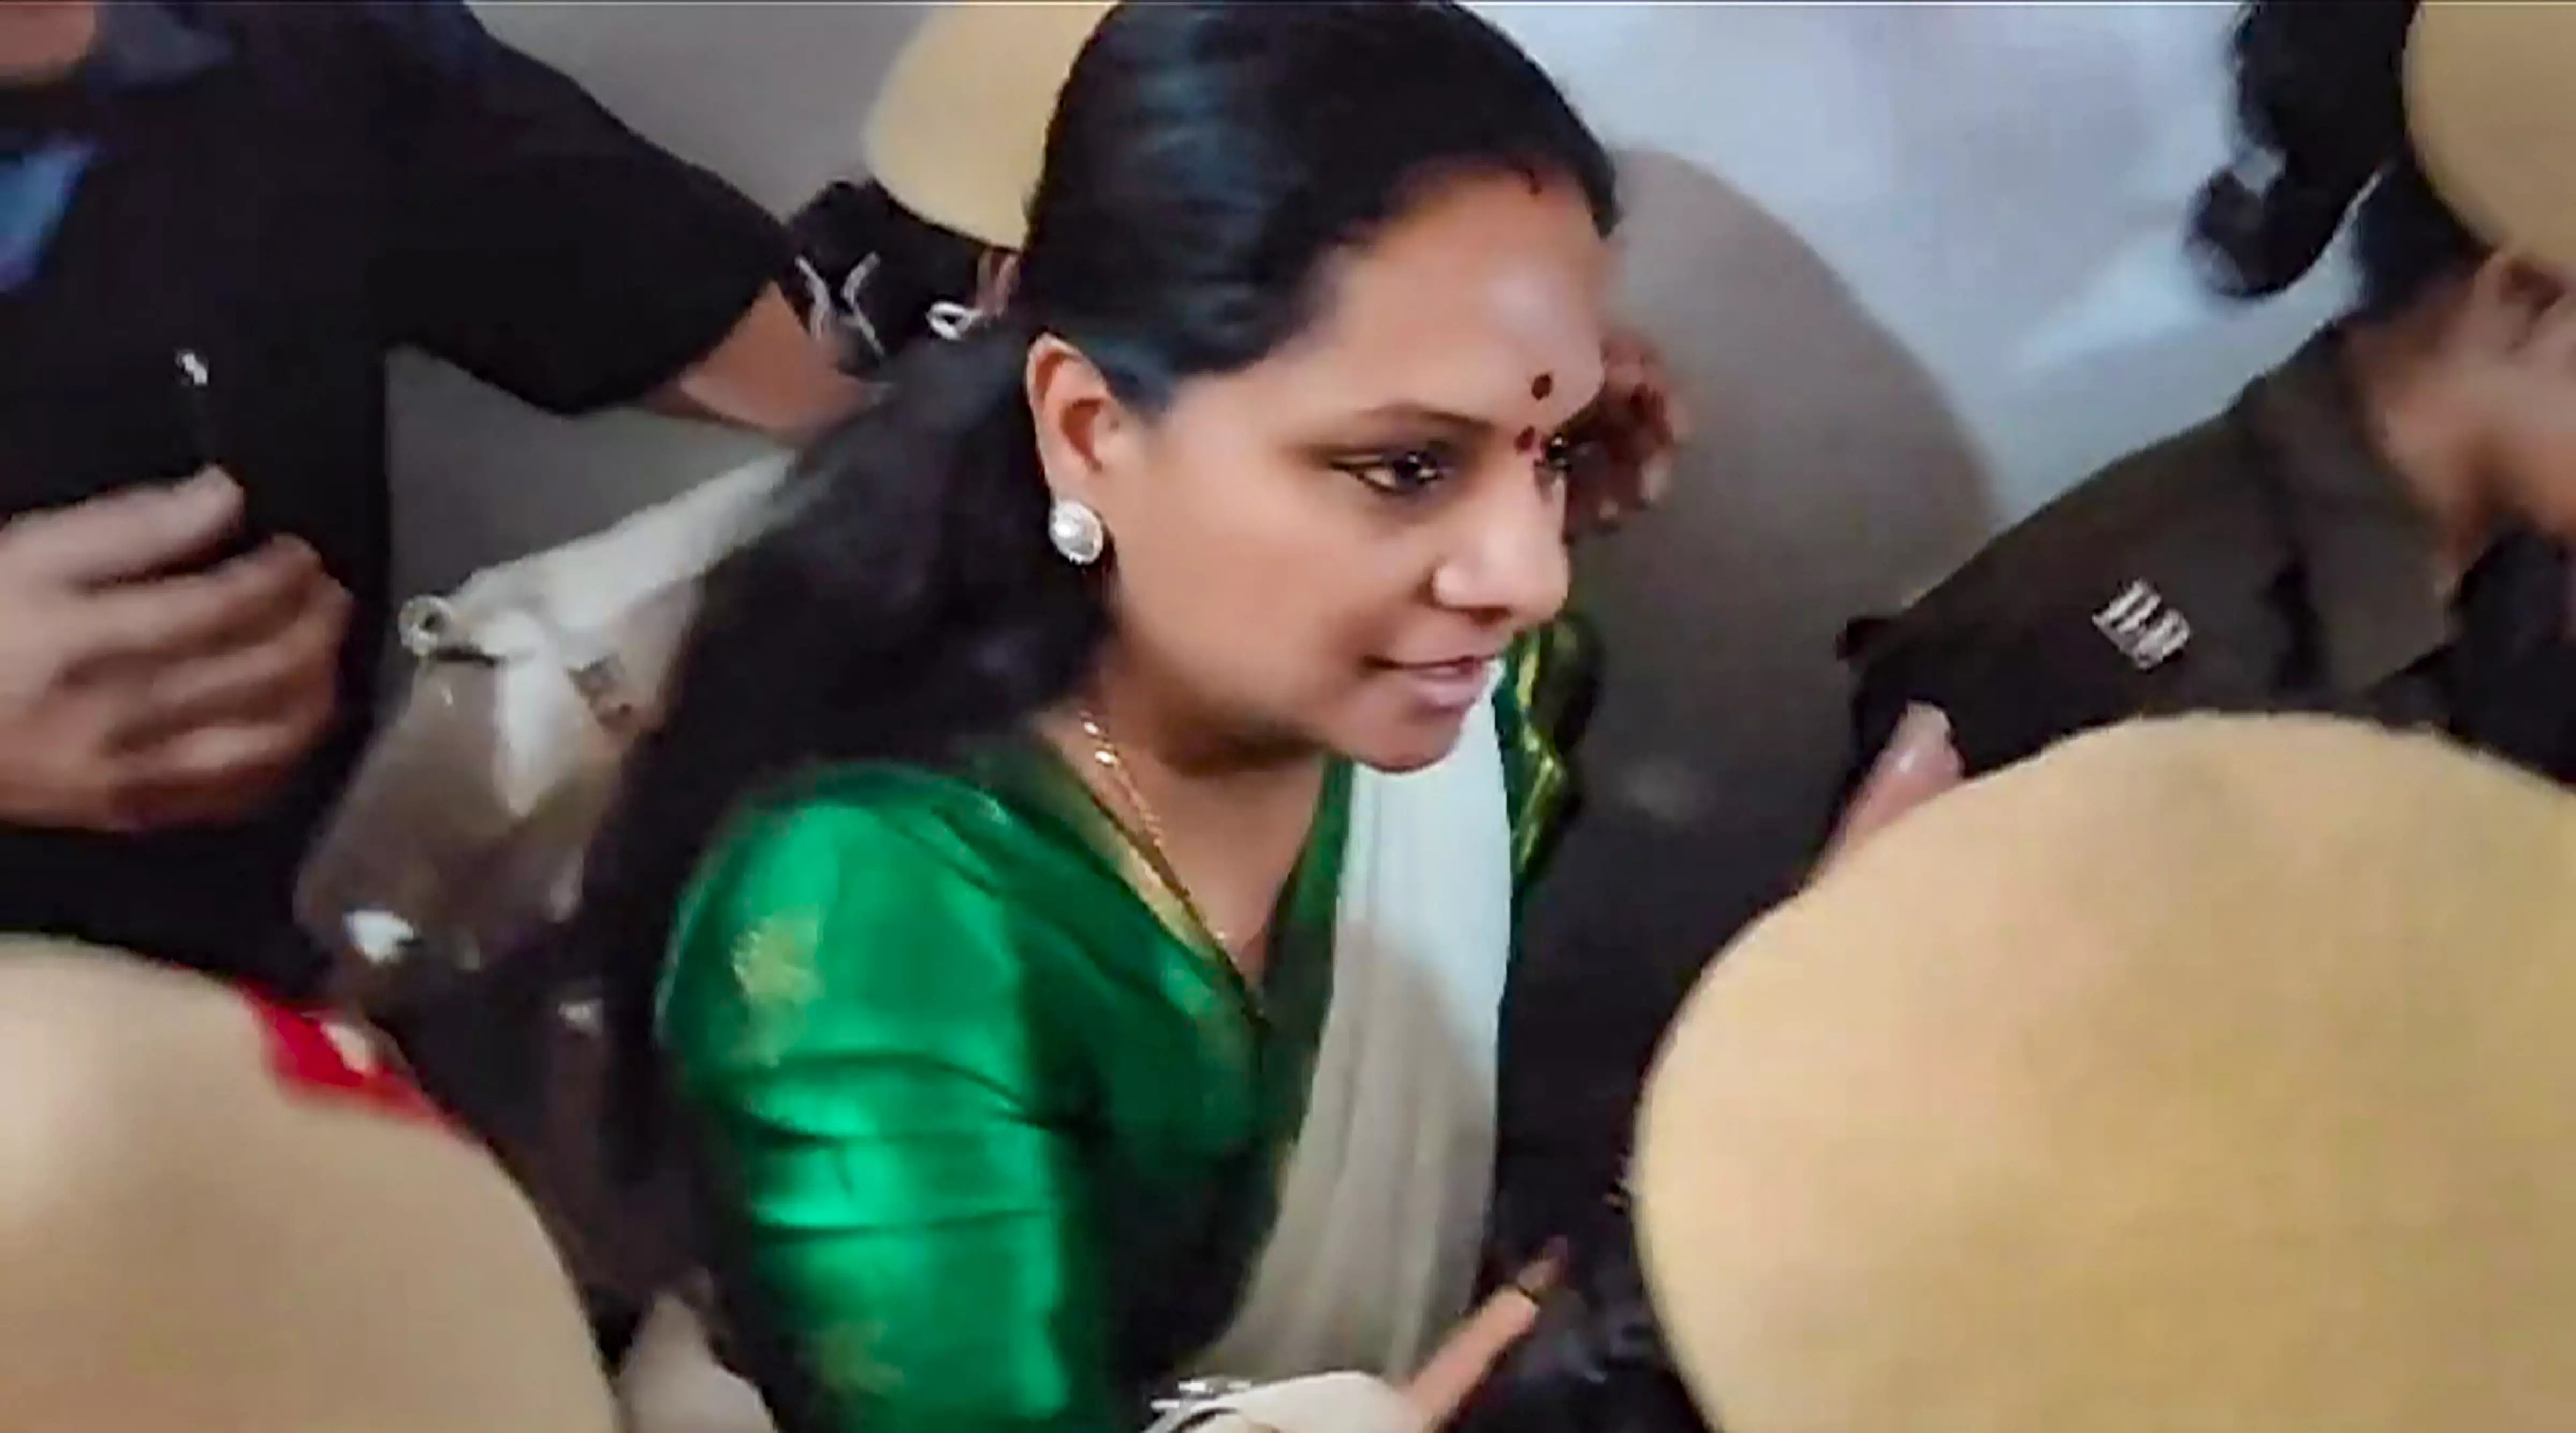 BRS leader Kavitha requests court to reconsider allowing CBI to interrogate her in jail